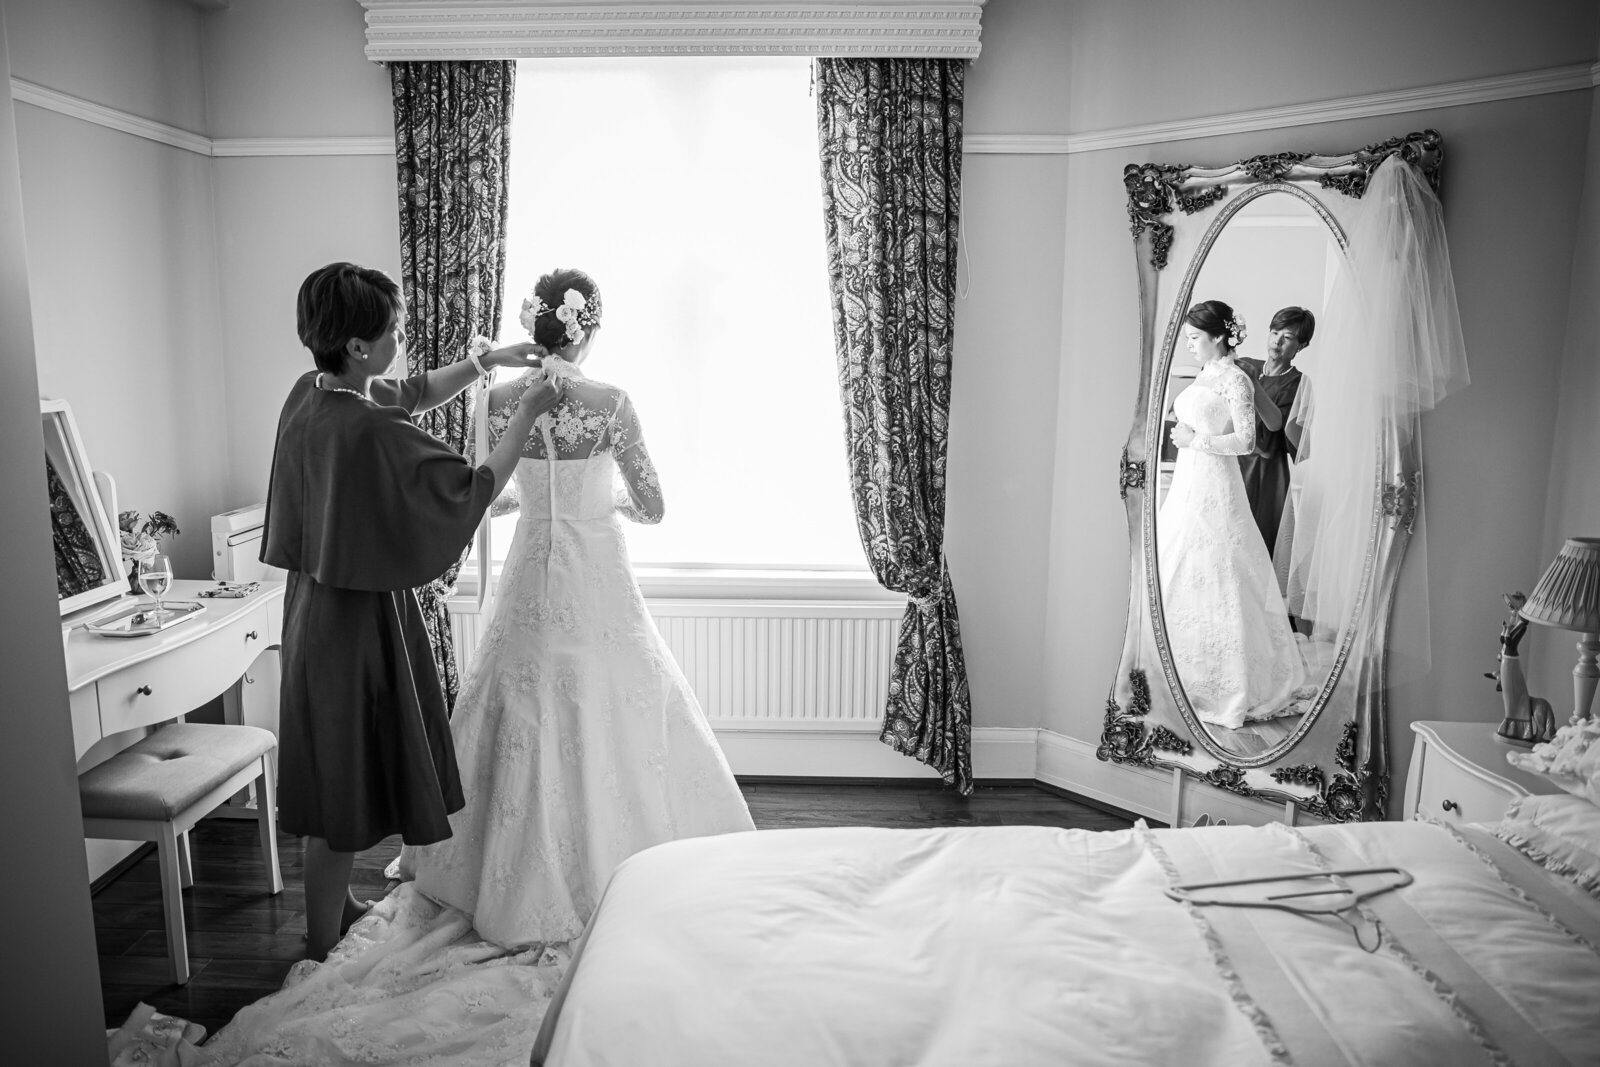 The mother of the Bride helping her daughter get ready for her wedding